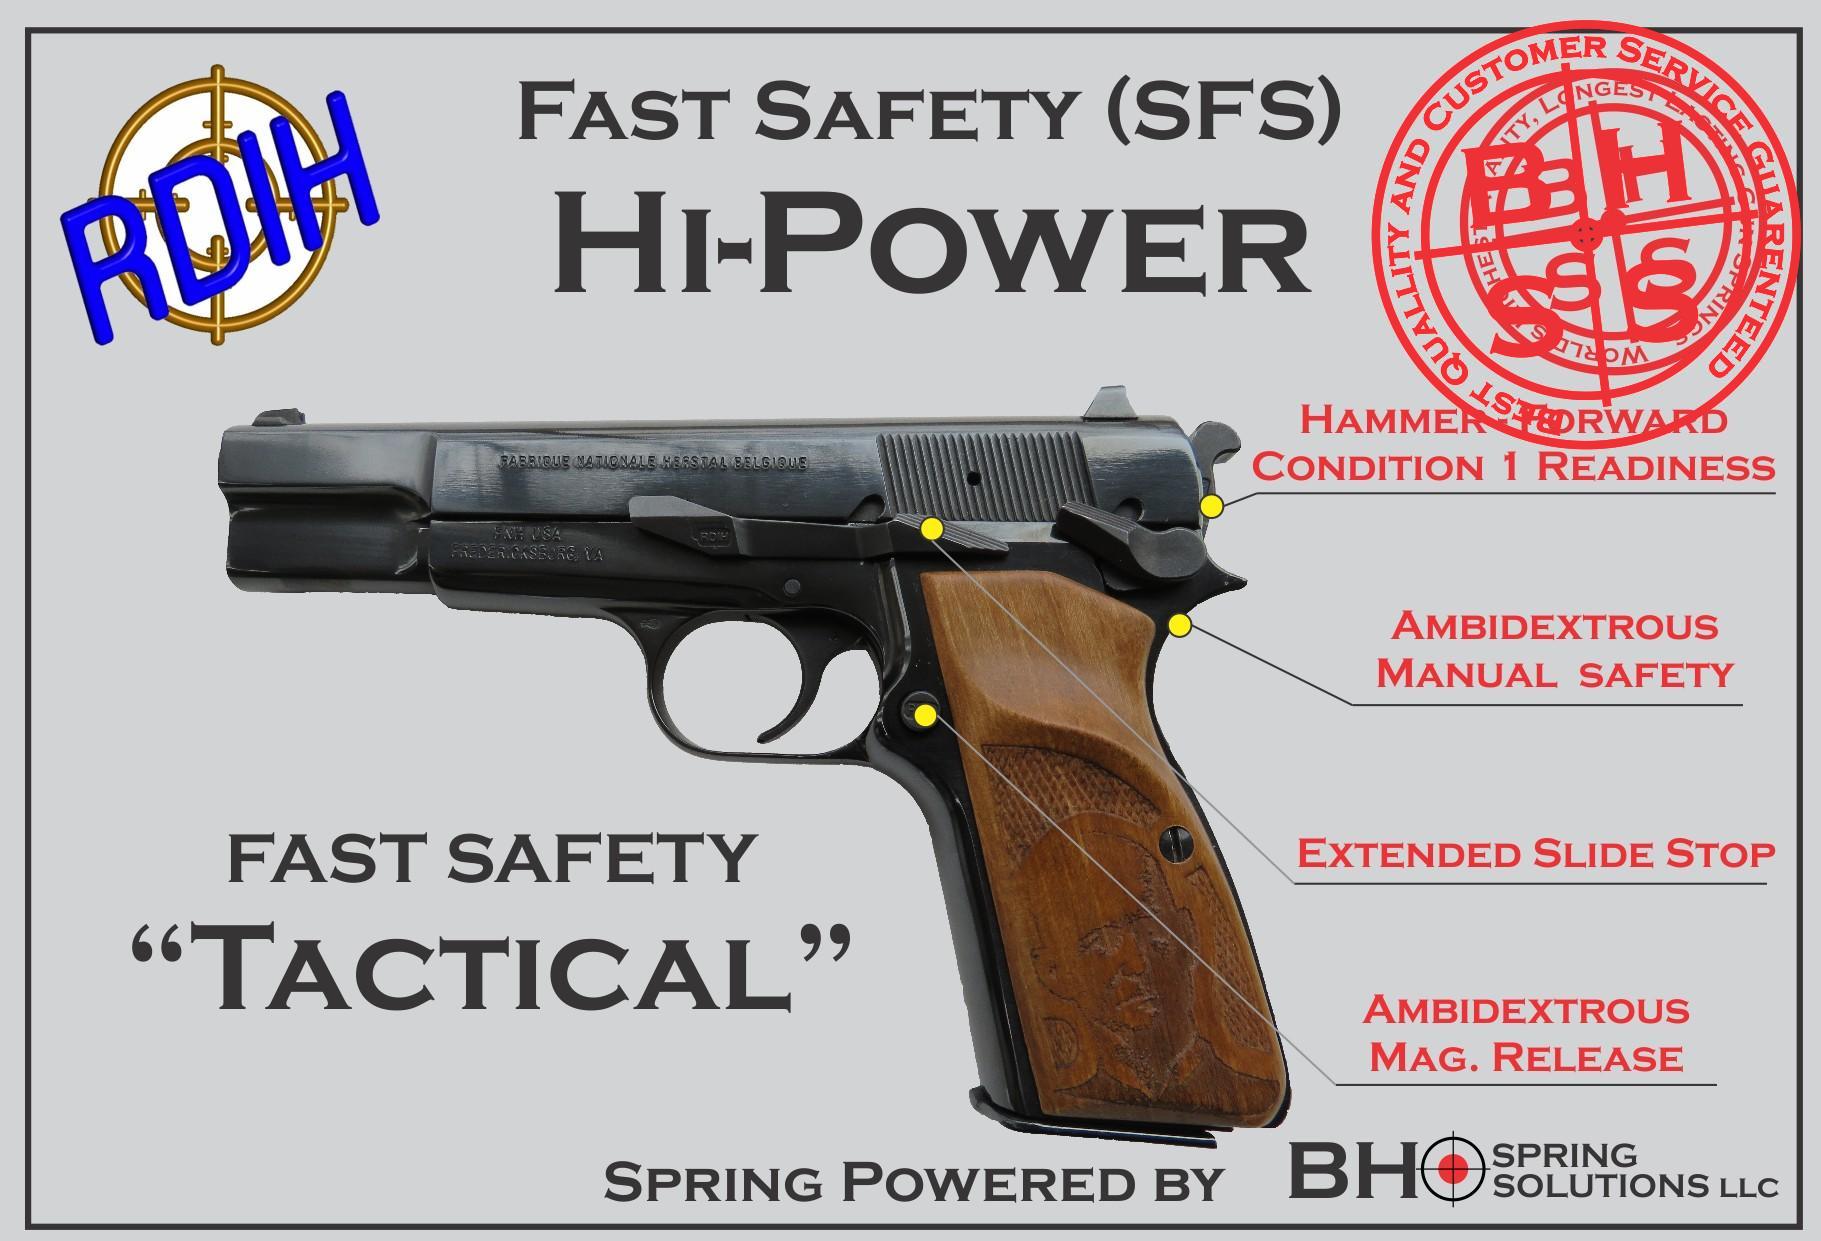 Fast Safety (SFS v2.0) "Tactical" for Hi-Power and BHSpring Kit